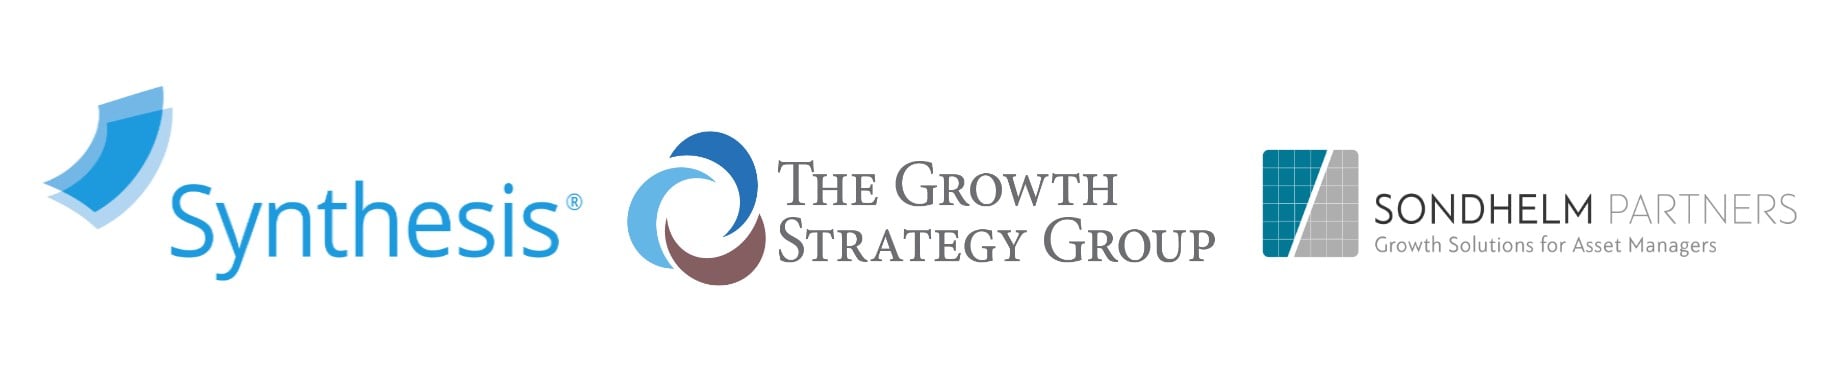 Synthesis Technology, The Growth Strategy Group, Sondhelm Partners logos